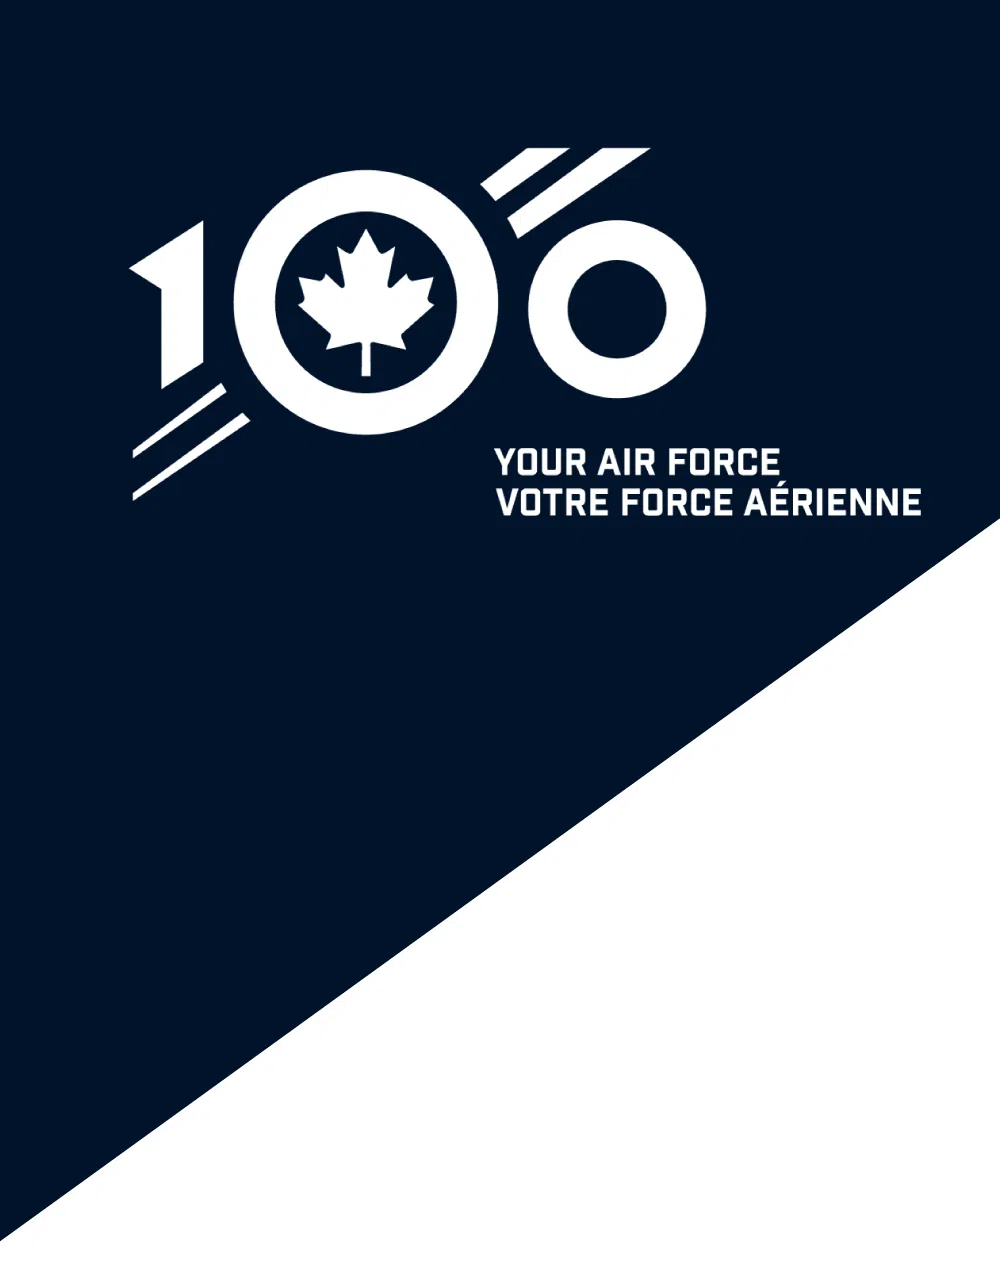 Freedom of the City honour to be given during RCAF 100th anniversary event